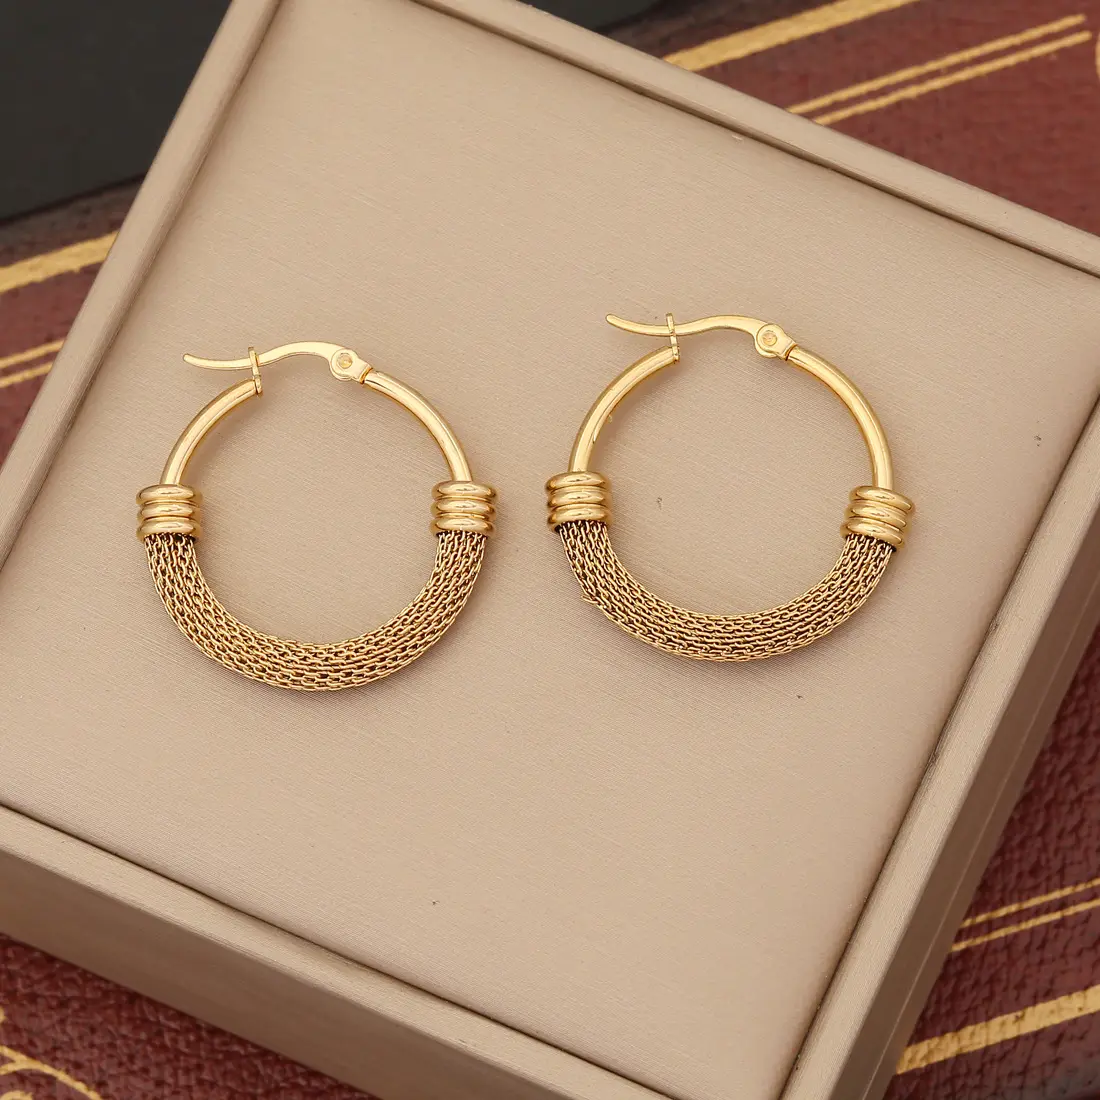 Women Huggie Earrings Unique Designs Gold Plating Stainless Steel Large Hoop Earrings for Female Round Circle Earring Jewelry